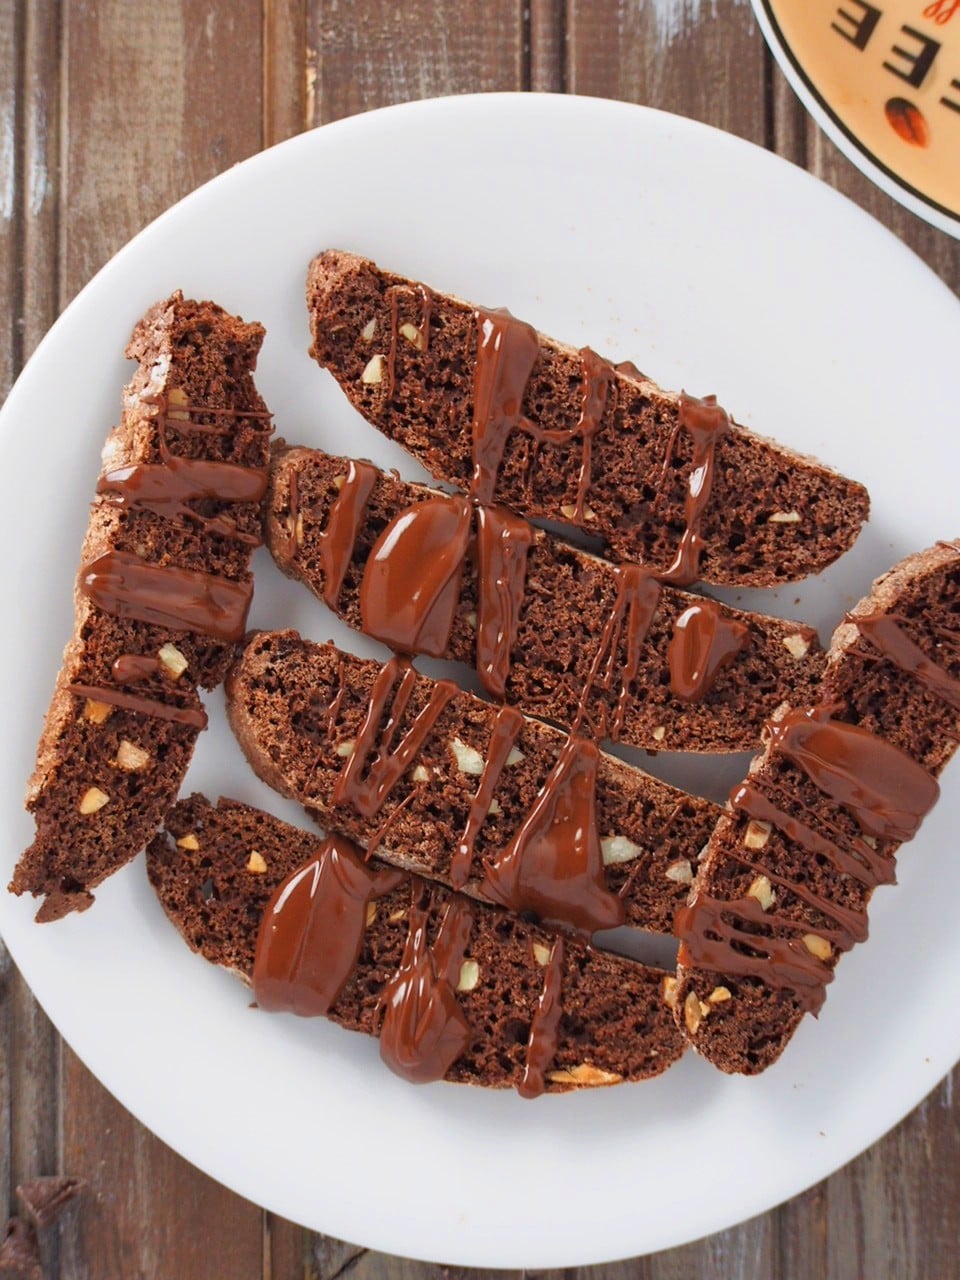 Glazed Almond Chocolate Biscotti on a serving plate.